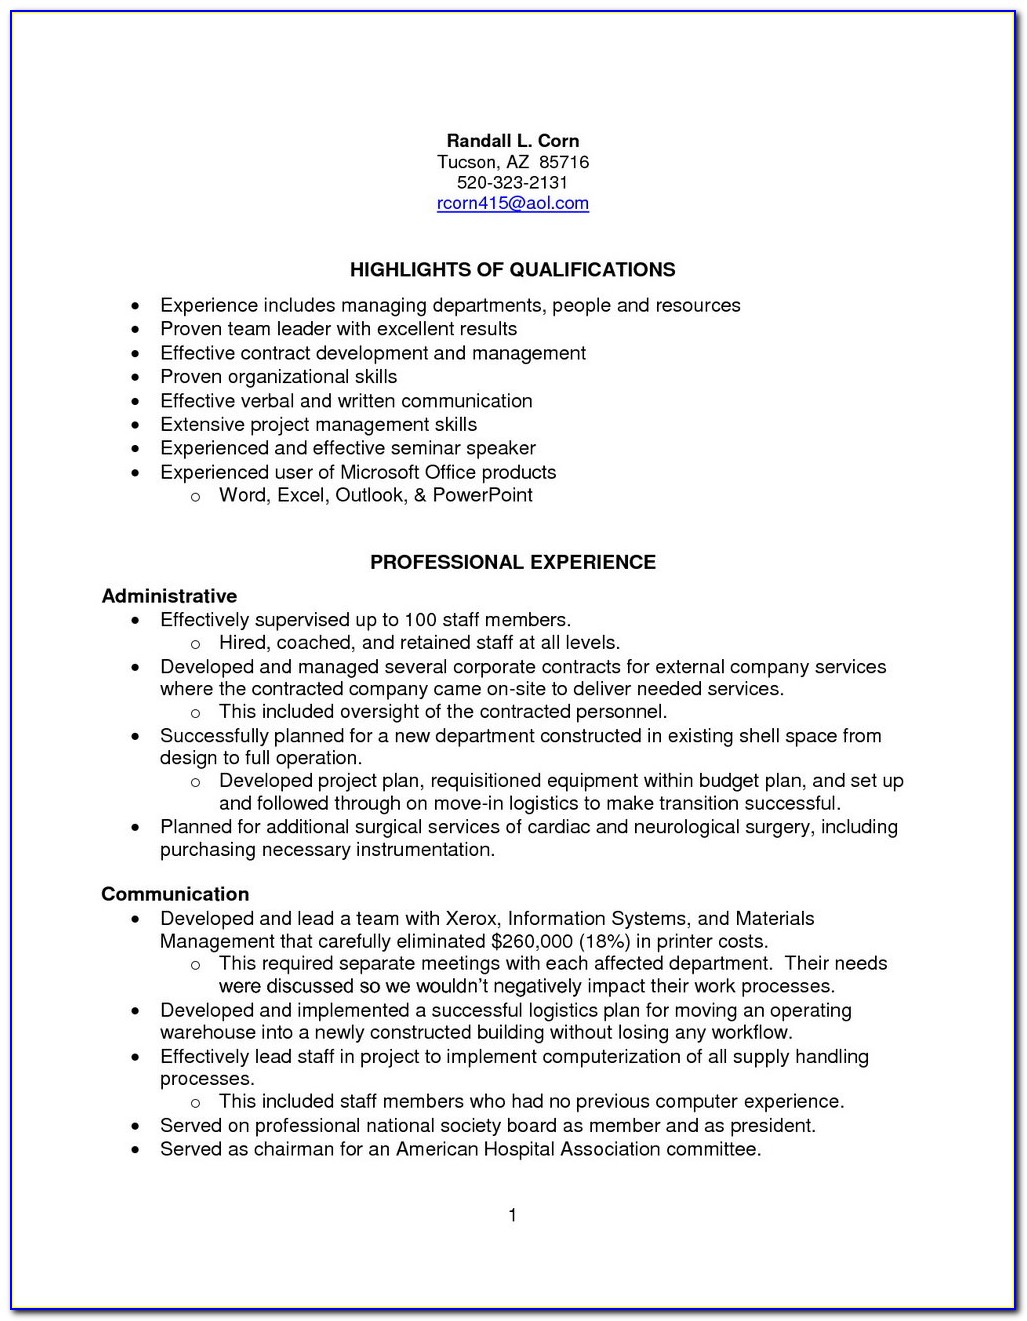 Free Sample Resume For Sterile Processing Technician